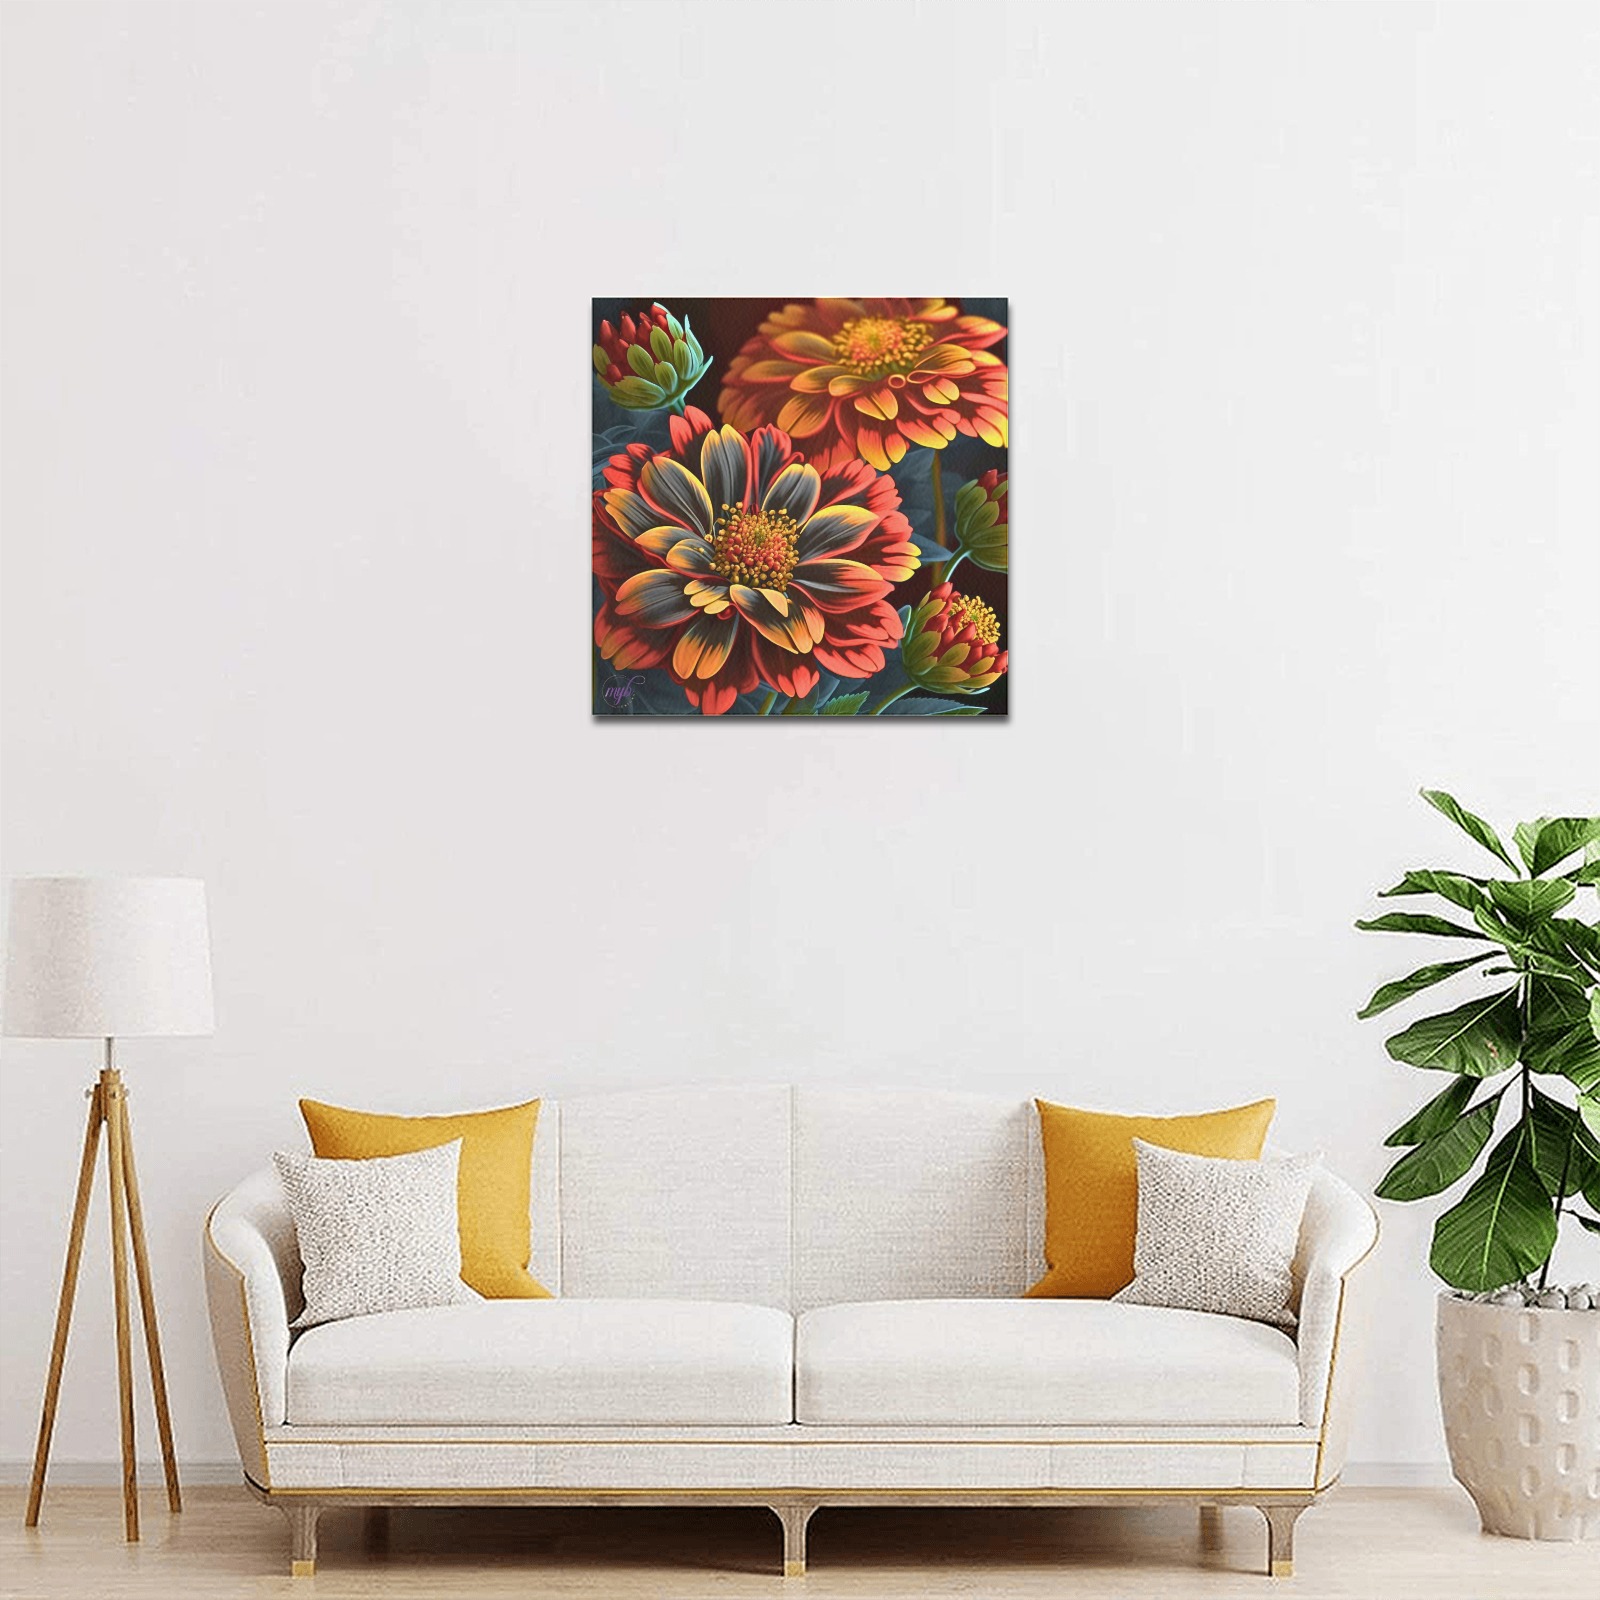 April Showers bring May Flowers: Upgraded Canvas Print 16"x16"